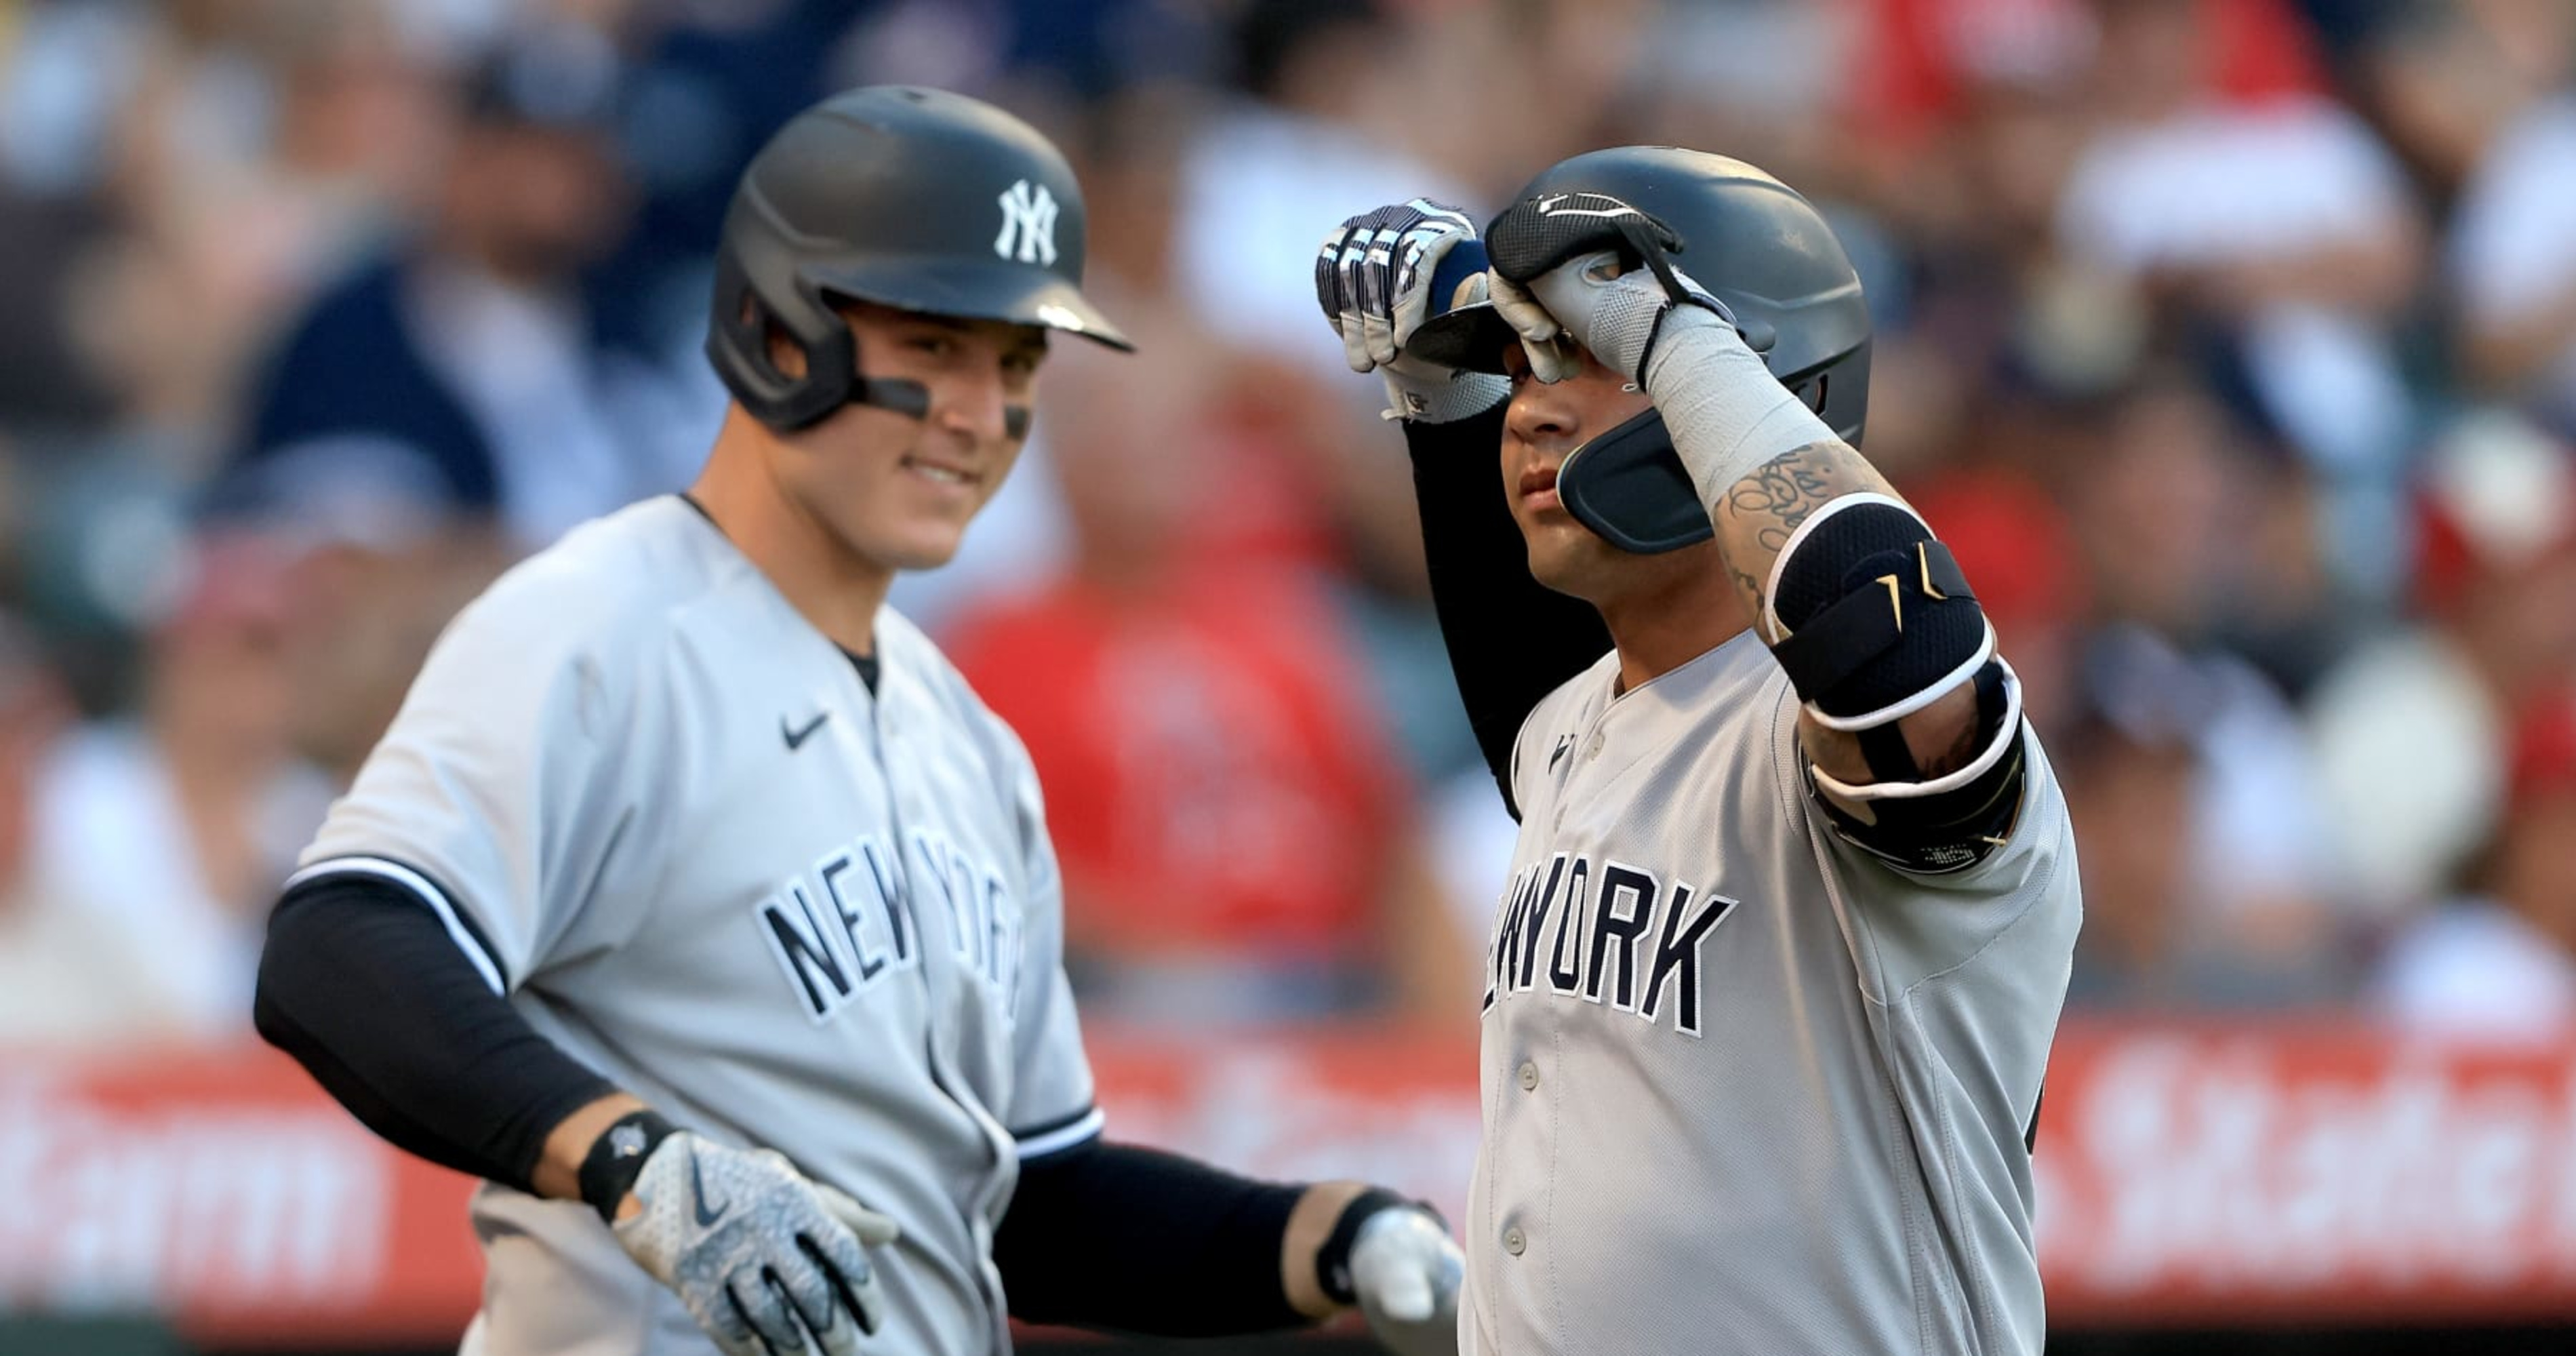 Reds: 1 Yankees player to target at the MLB trade deadline, 2 they